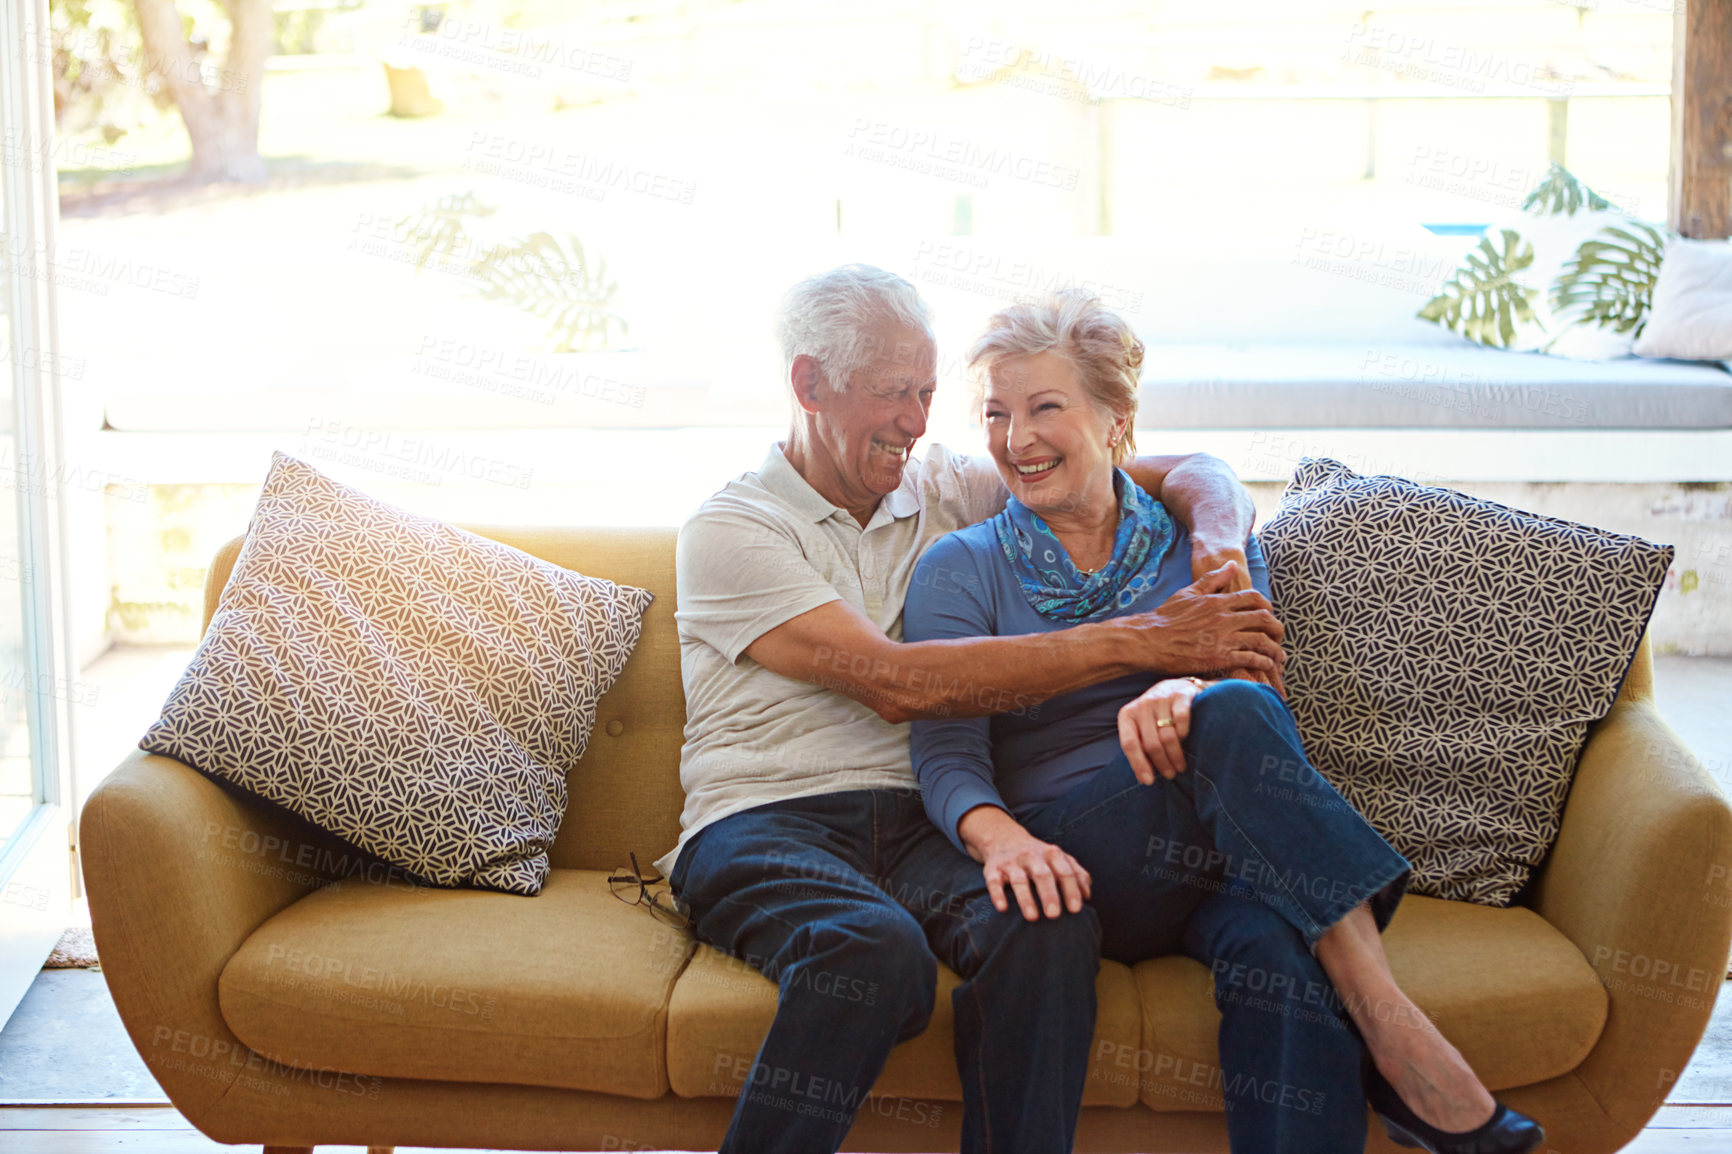 Buy stock photo Shot of an affectionate senior couple cuddling on a sofa at home